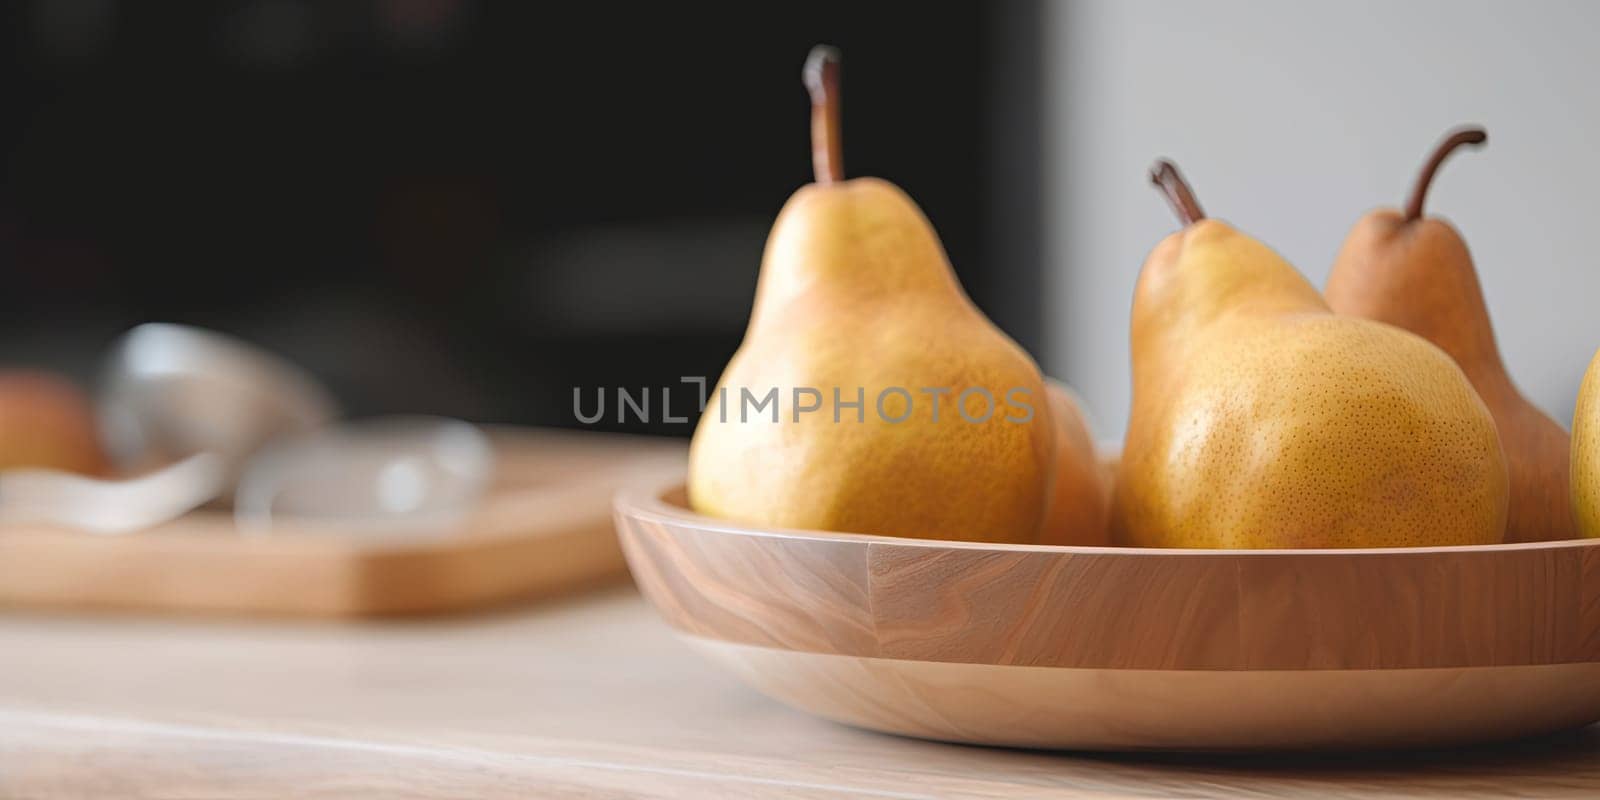 Pears in a bowl on the kitchen table by GekaSkr